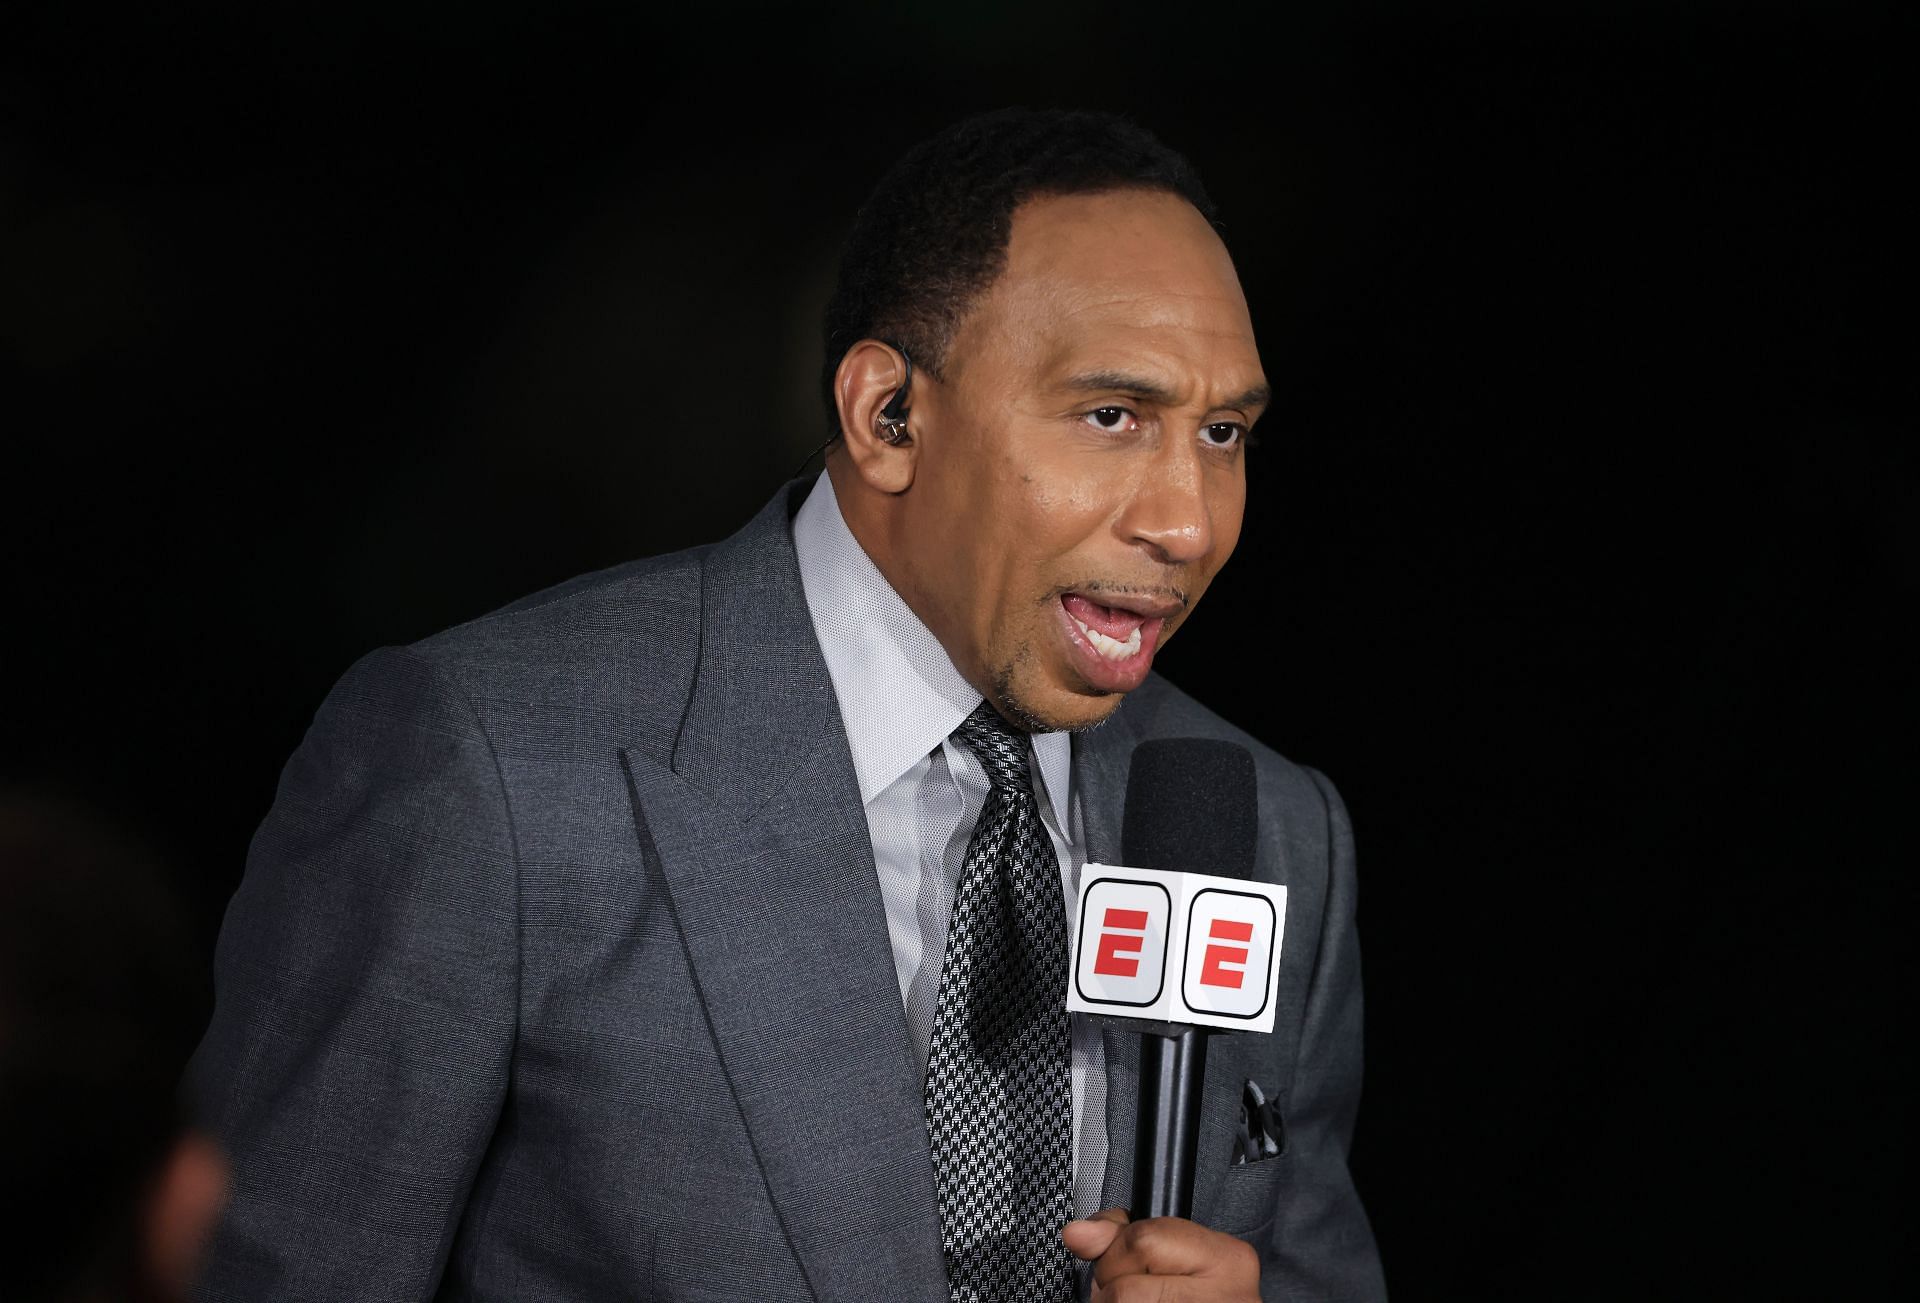 Stephen A. Smith at the 2021 NBA Finals